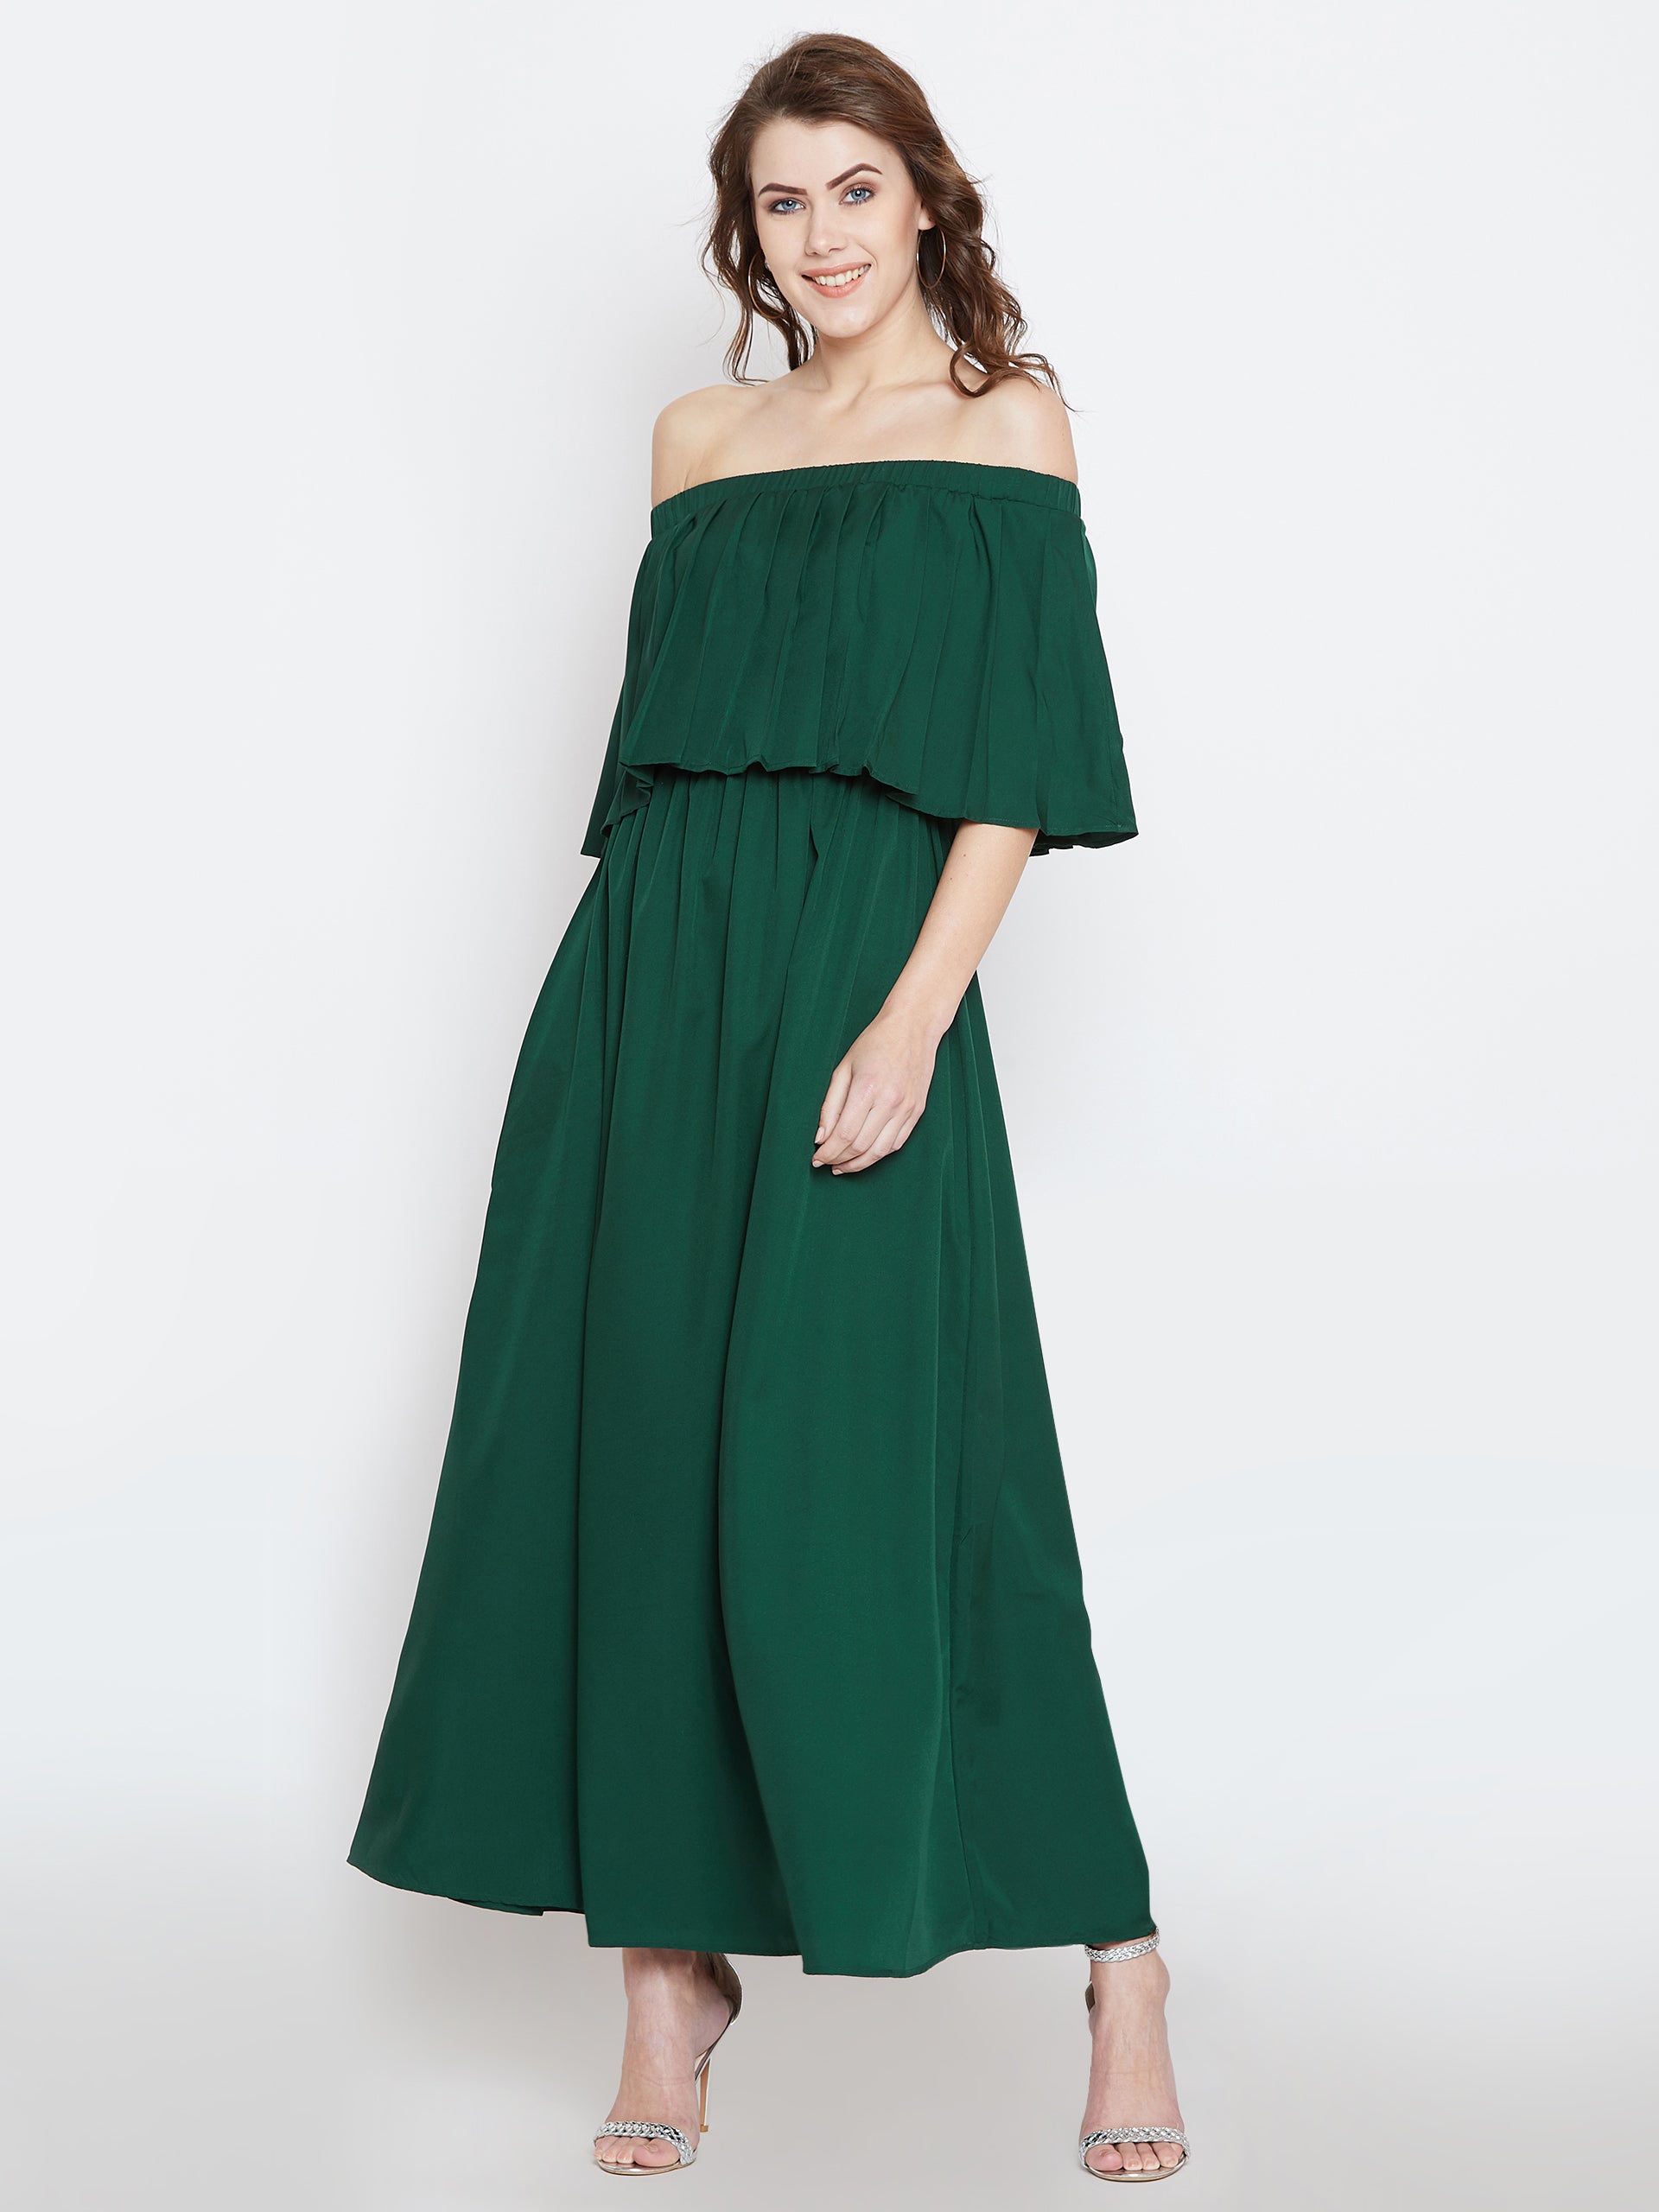 Berrylush Women Solid Green Off-Shoulder Neck Flared Sleeve Pleated Maxi Dress